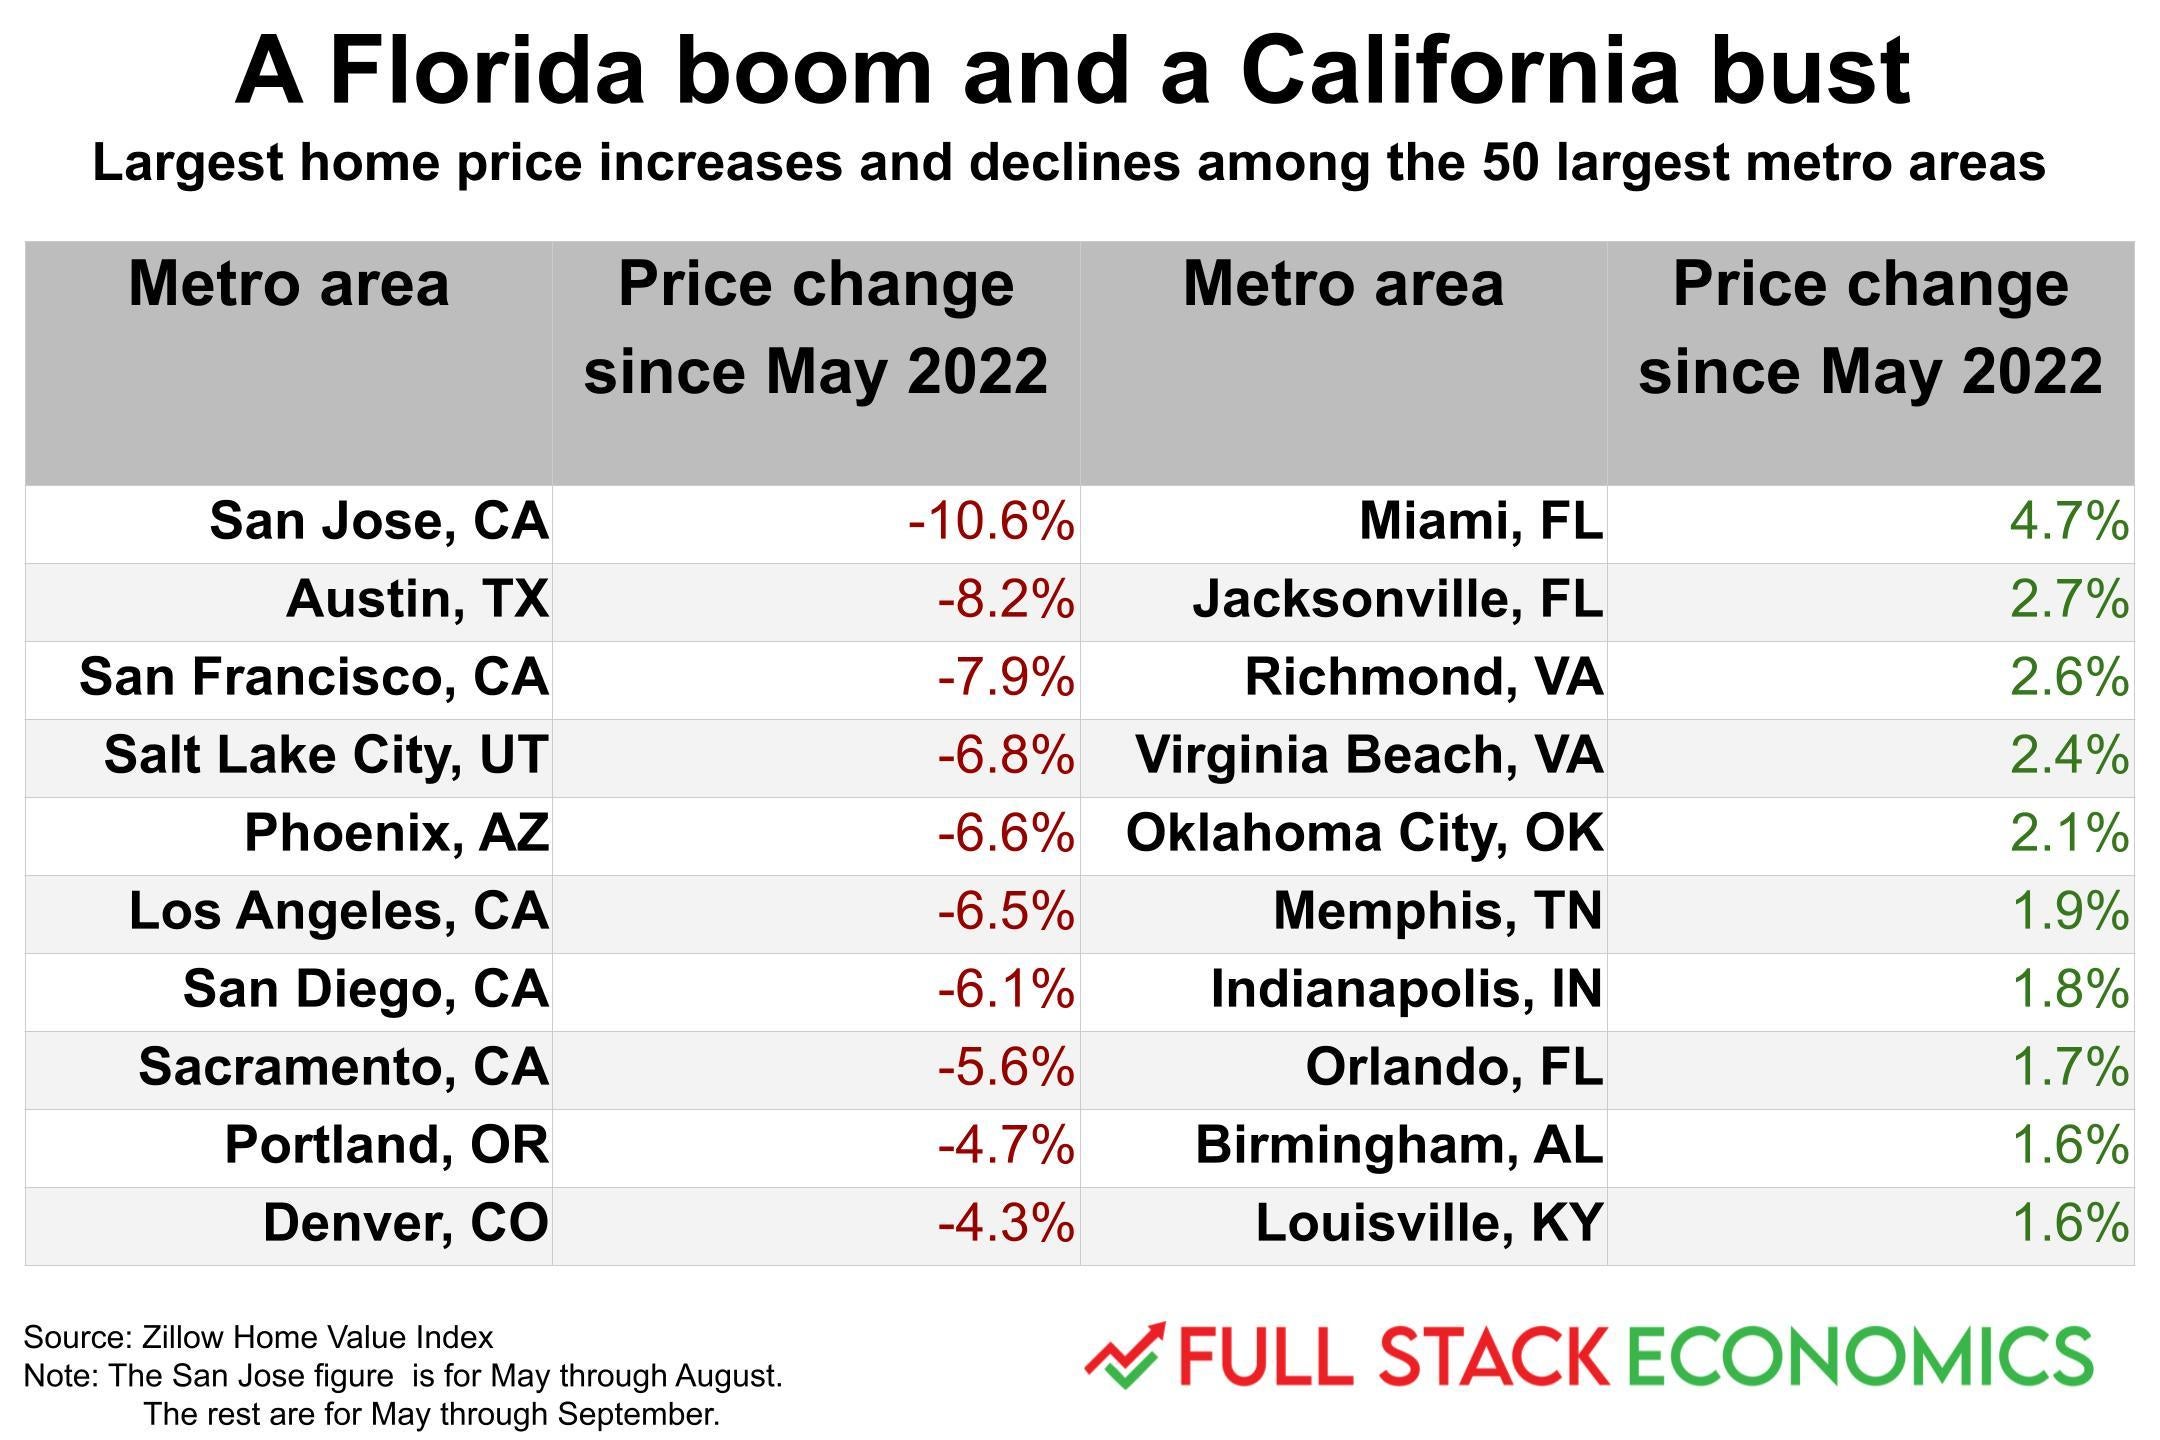 Two lists of the places seeing prices declines and rises. San Jose tops the former list with a drop of 10.6 percent. Miami tops the latter list with a rise of 4.7 percent.